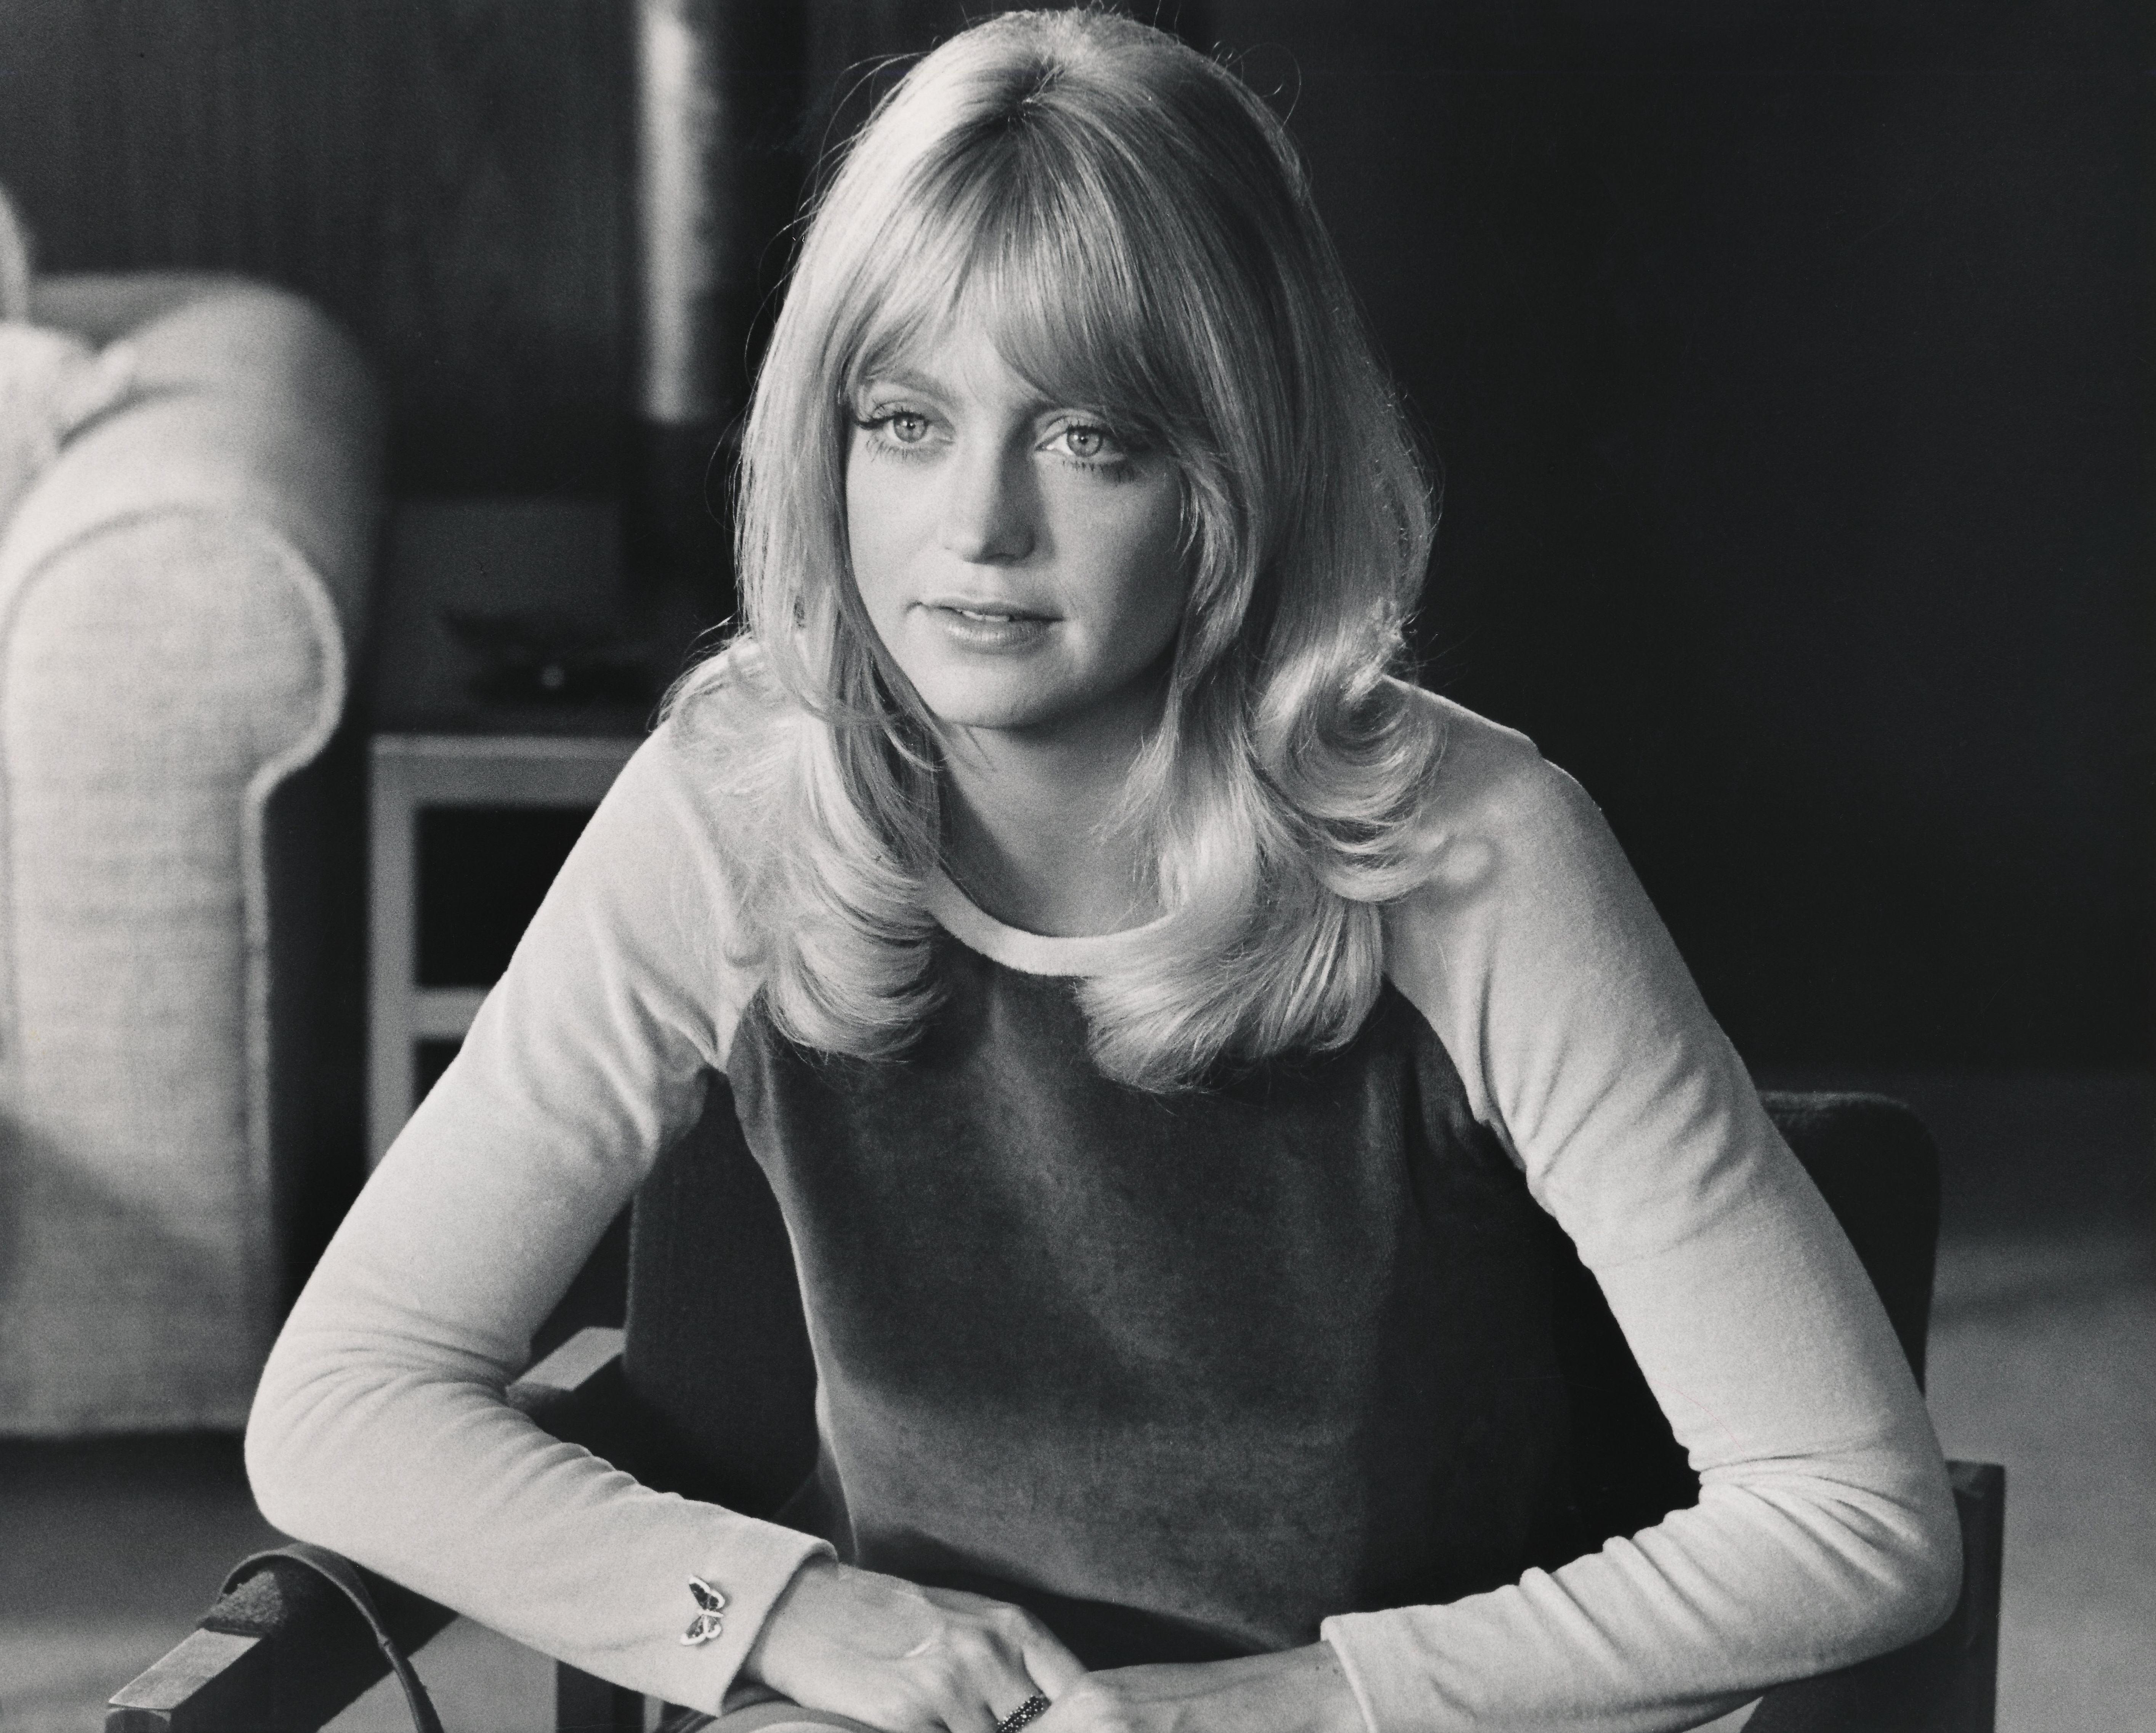 Unknown Portrait Photograph - Candid and Young Goldie Hawn Fine Art Print